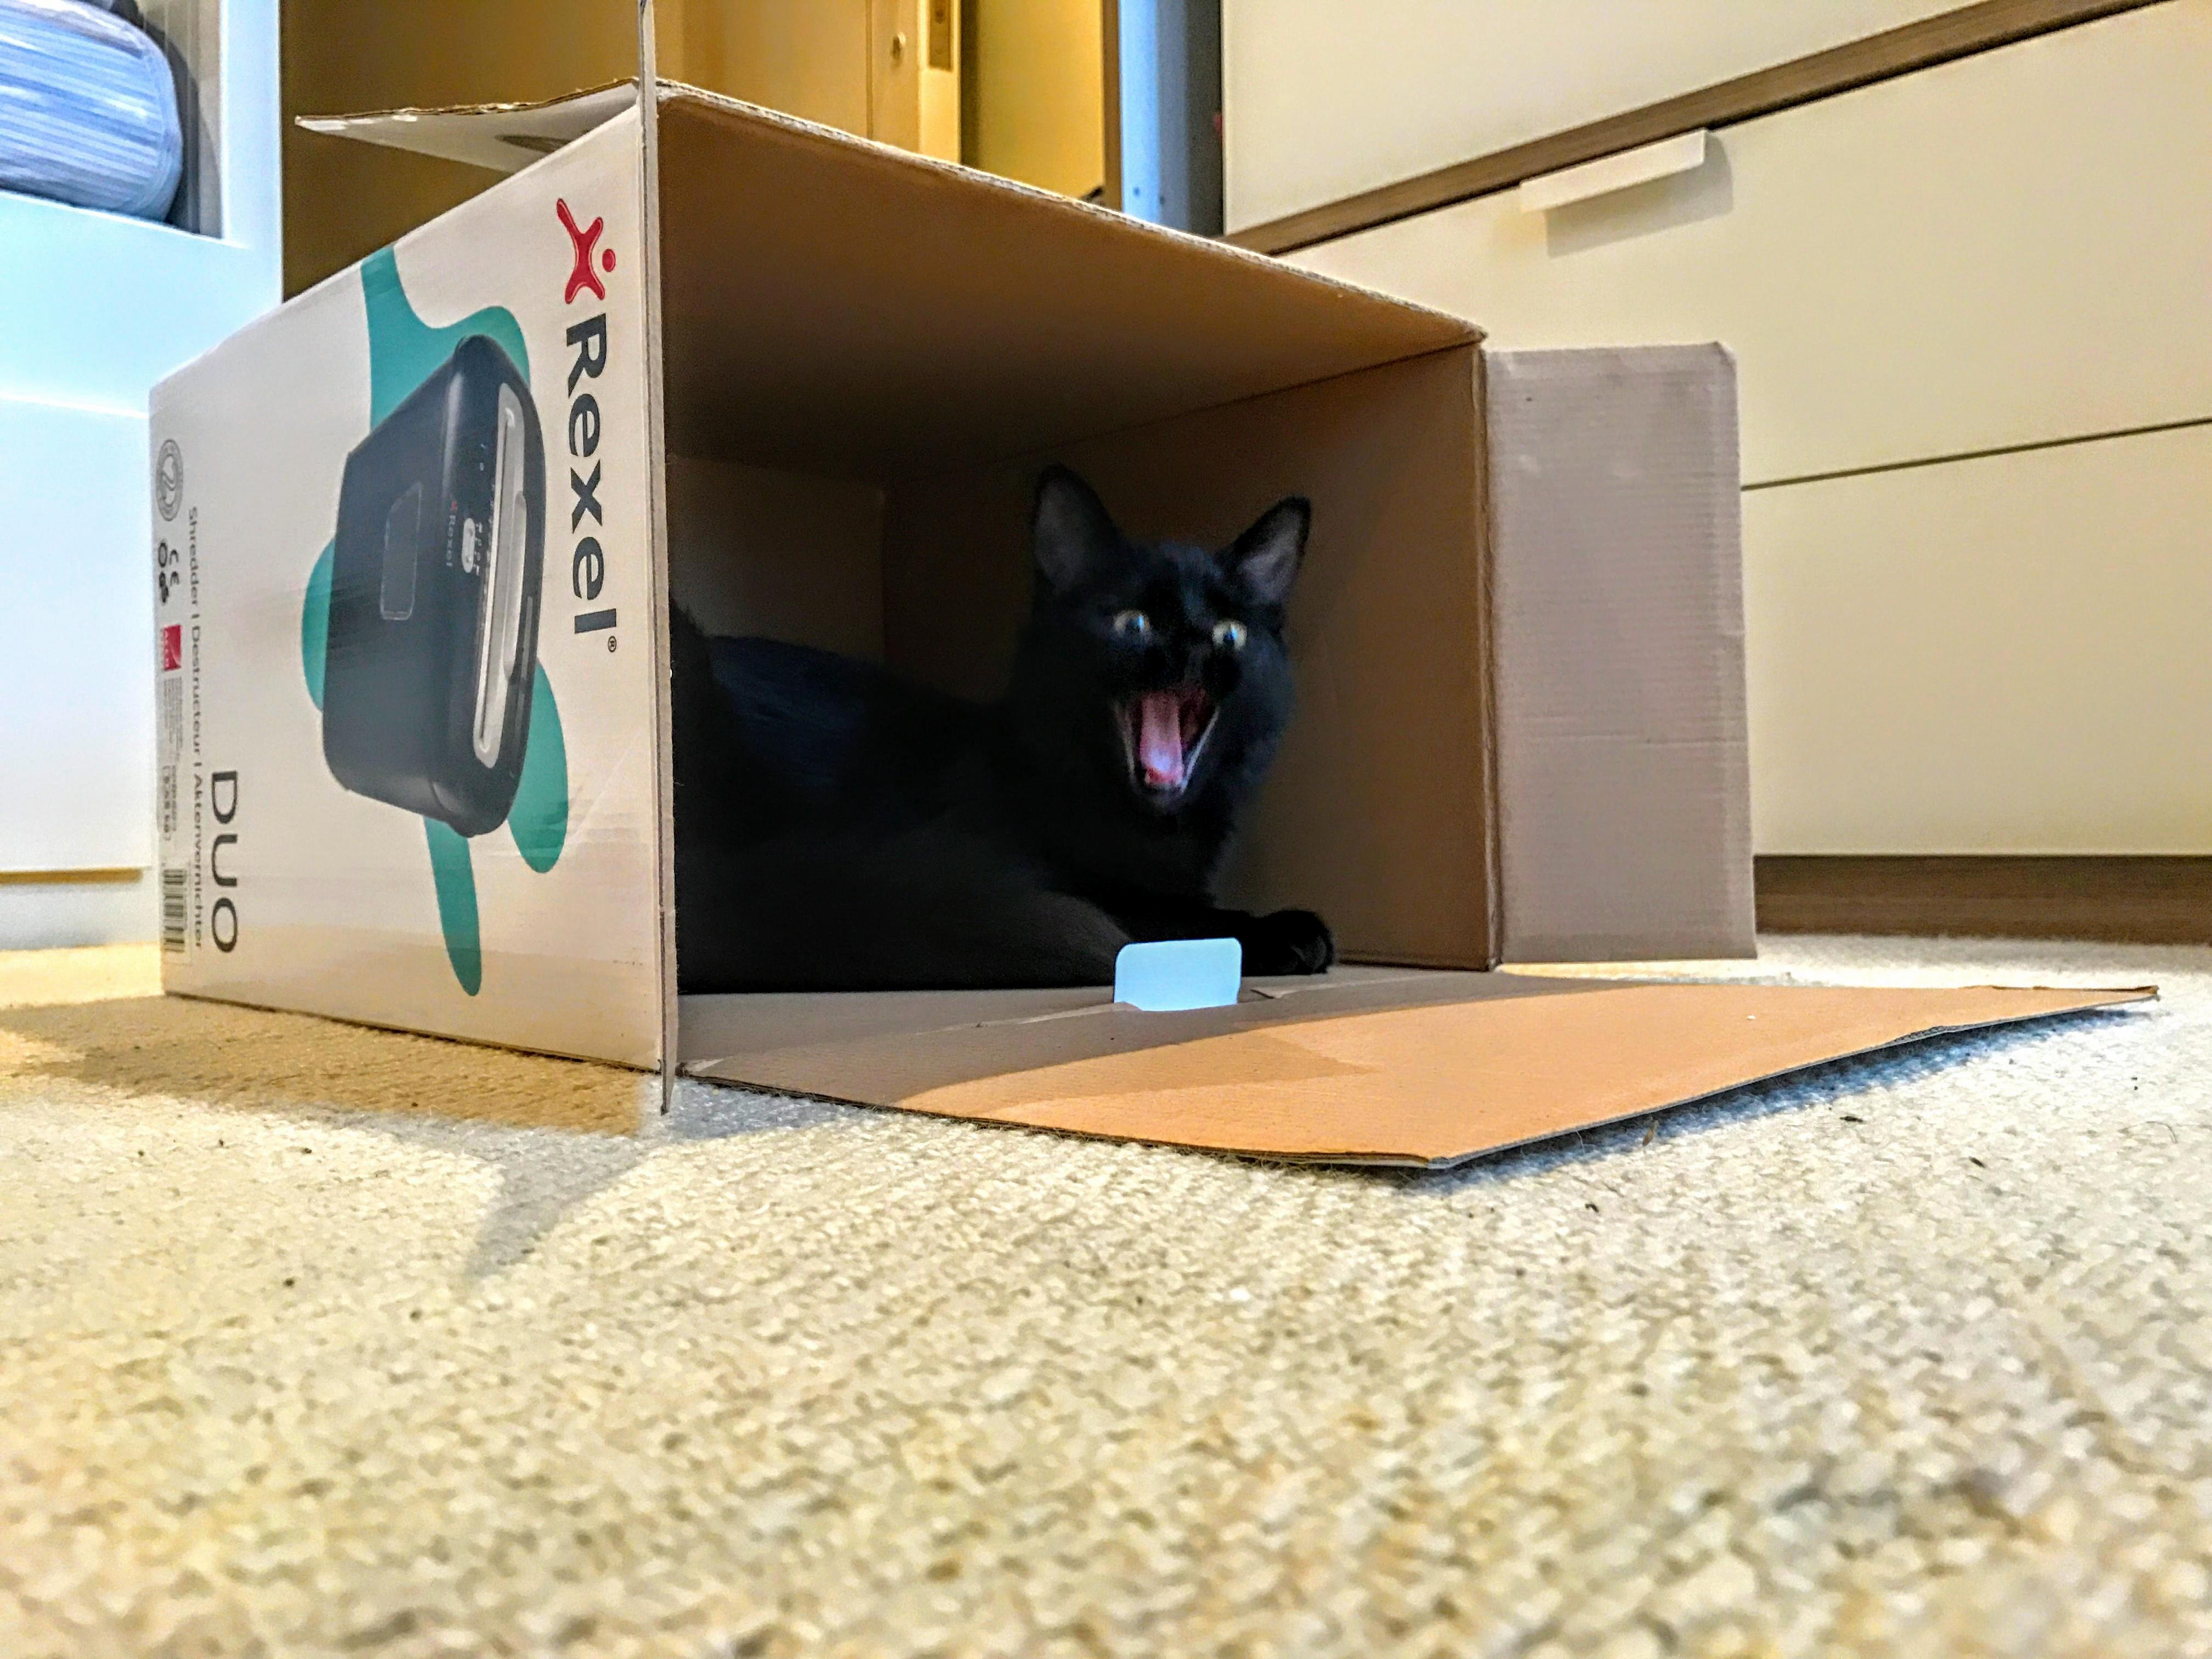 Cats reaction to new shredder box